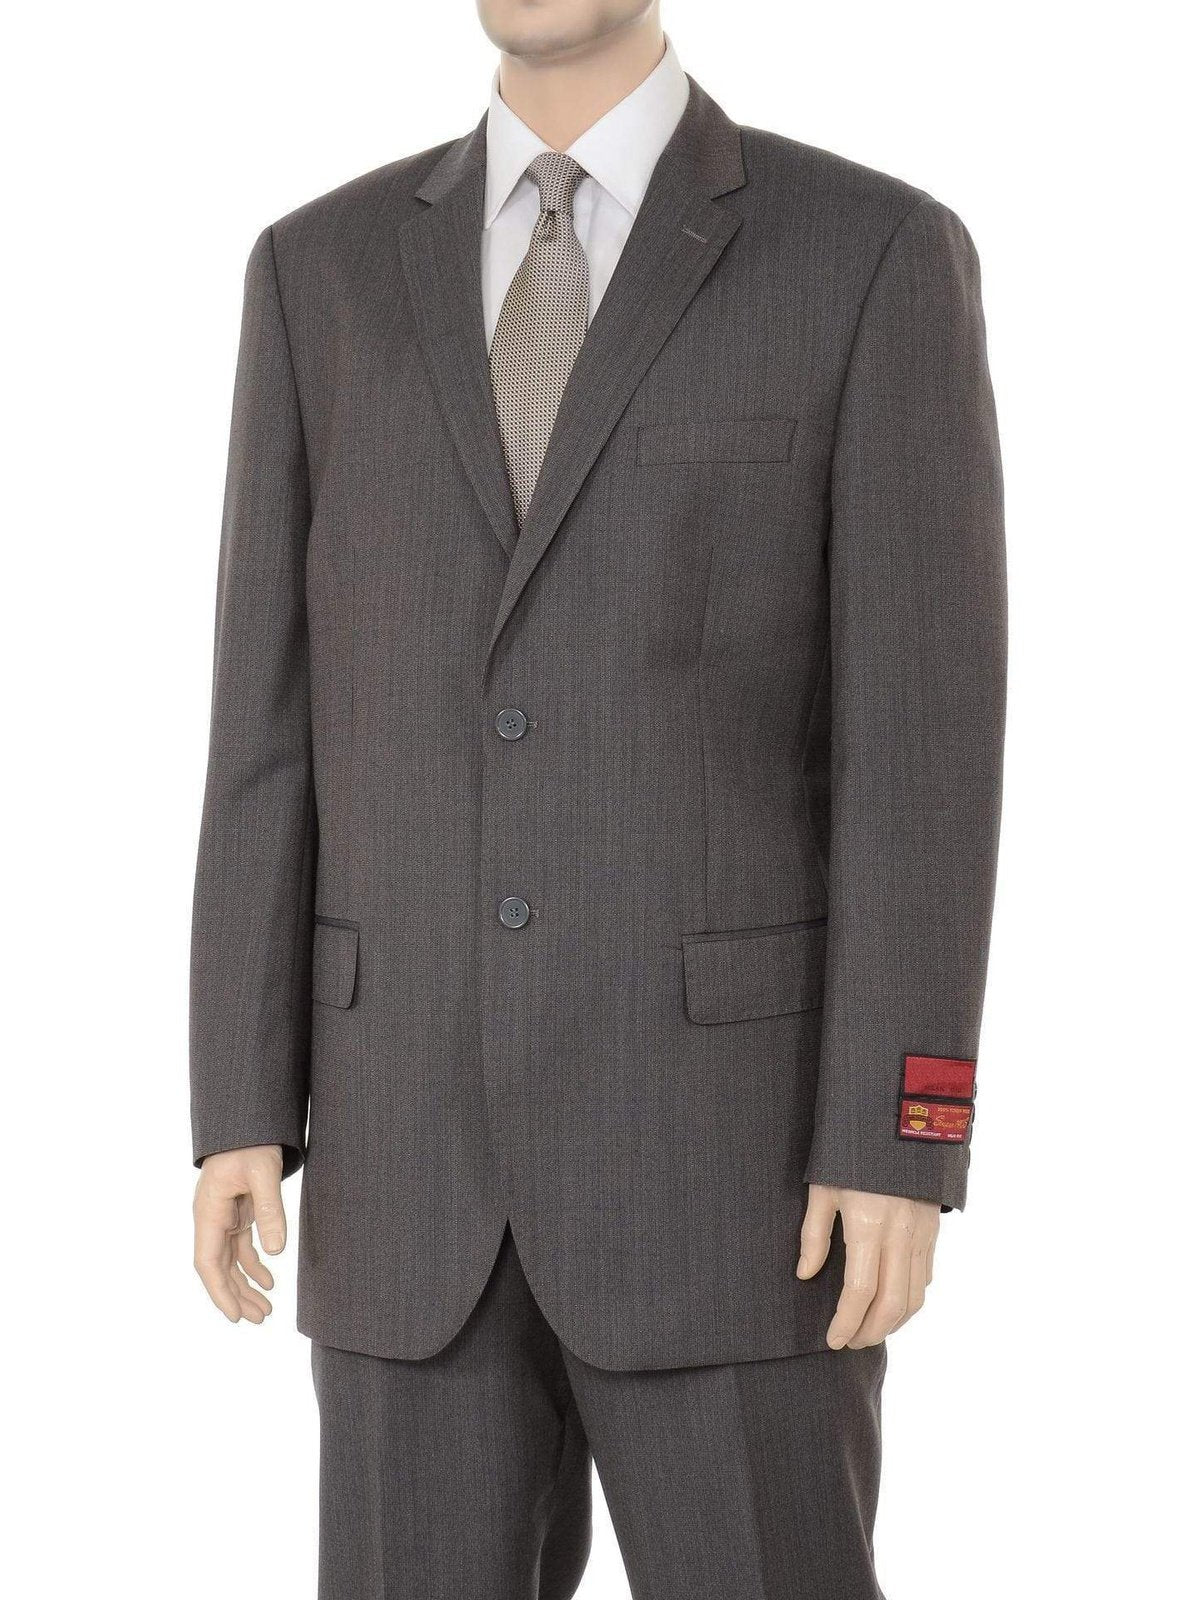 Slim fit Brown Neat Textured Two Button Wool Suit - The Suit Depot